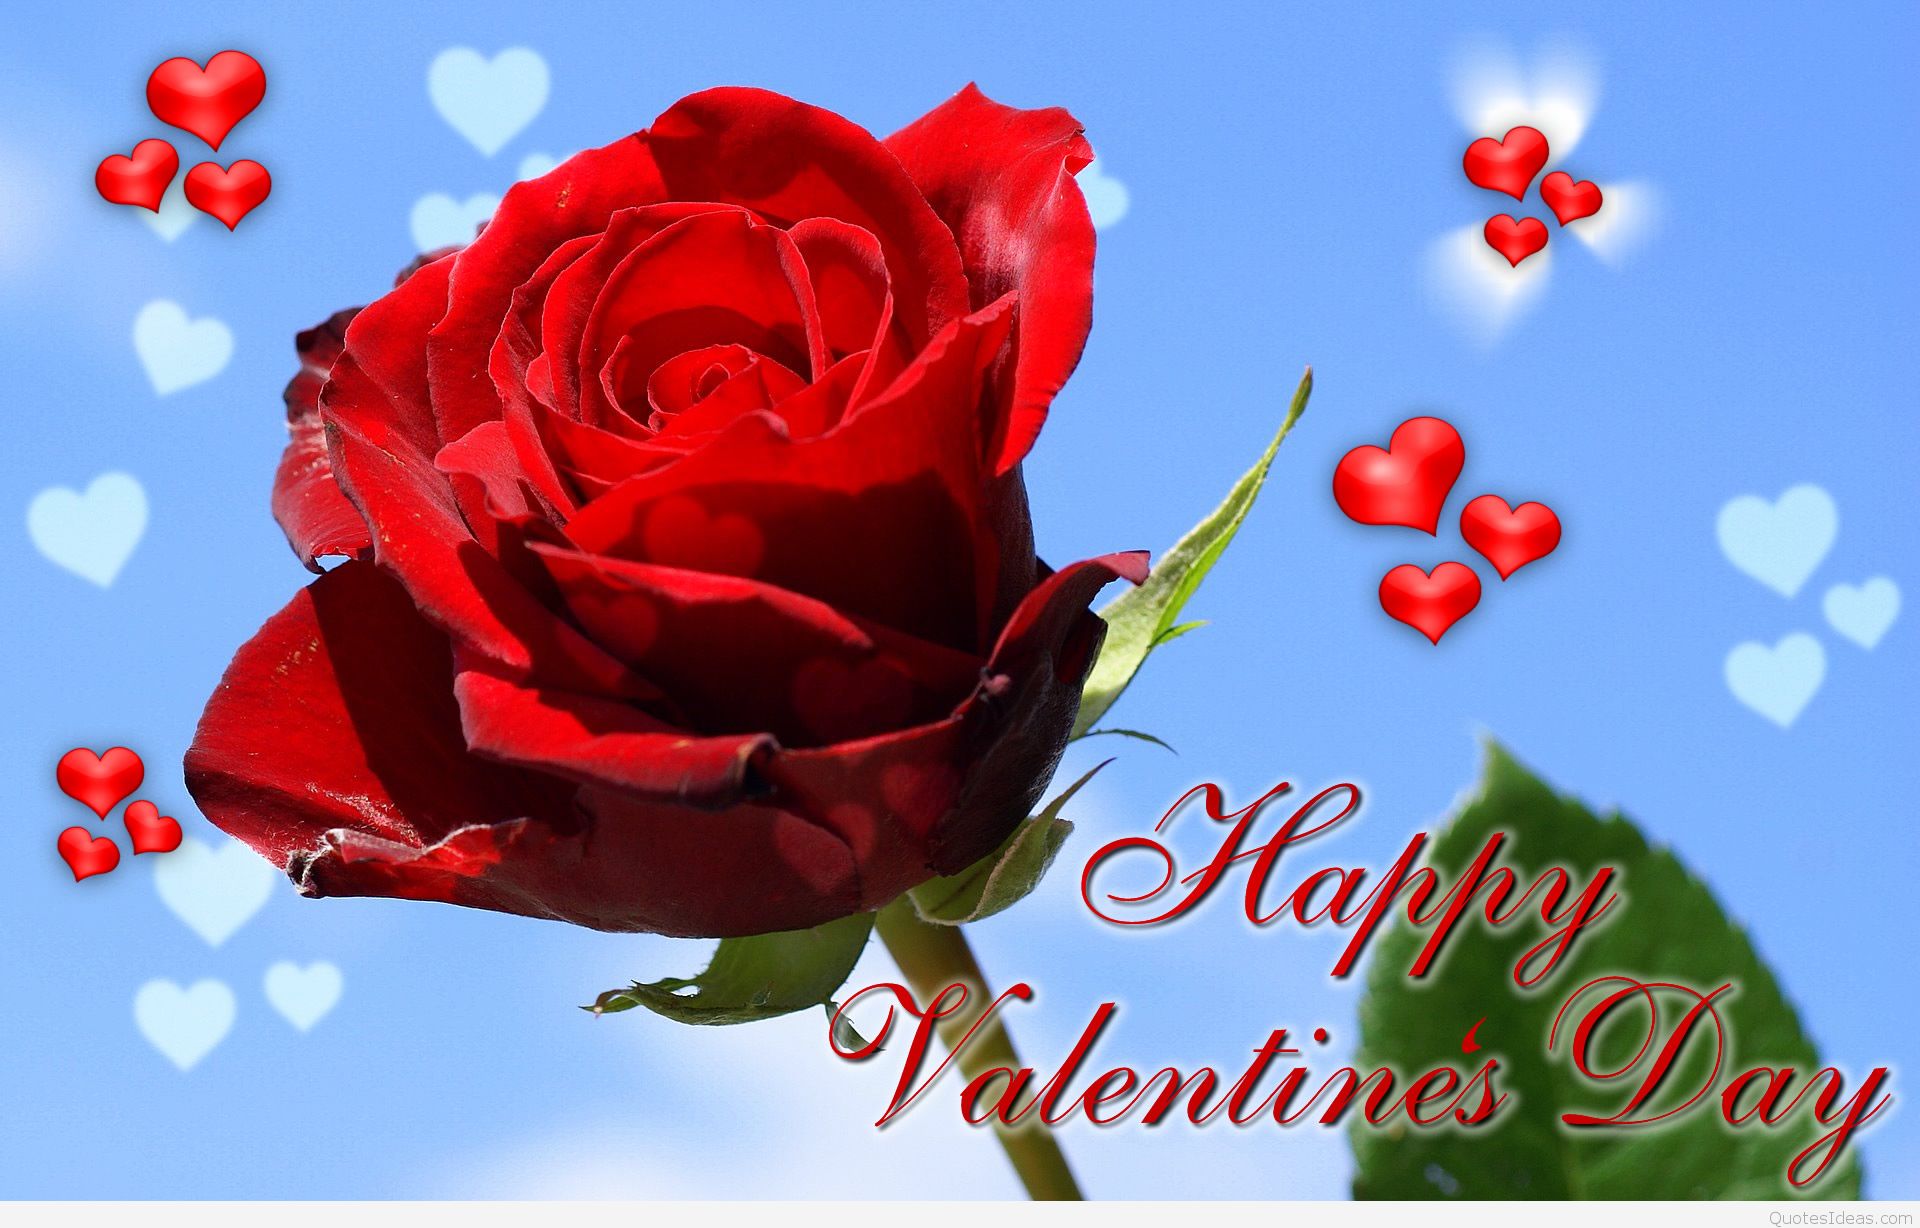 Happy Valentines Day Wallpaper High Quality 0o5w - Romantic Happy Valentine Day - HD Wallpaper 